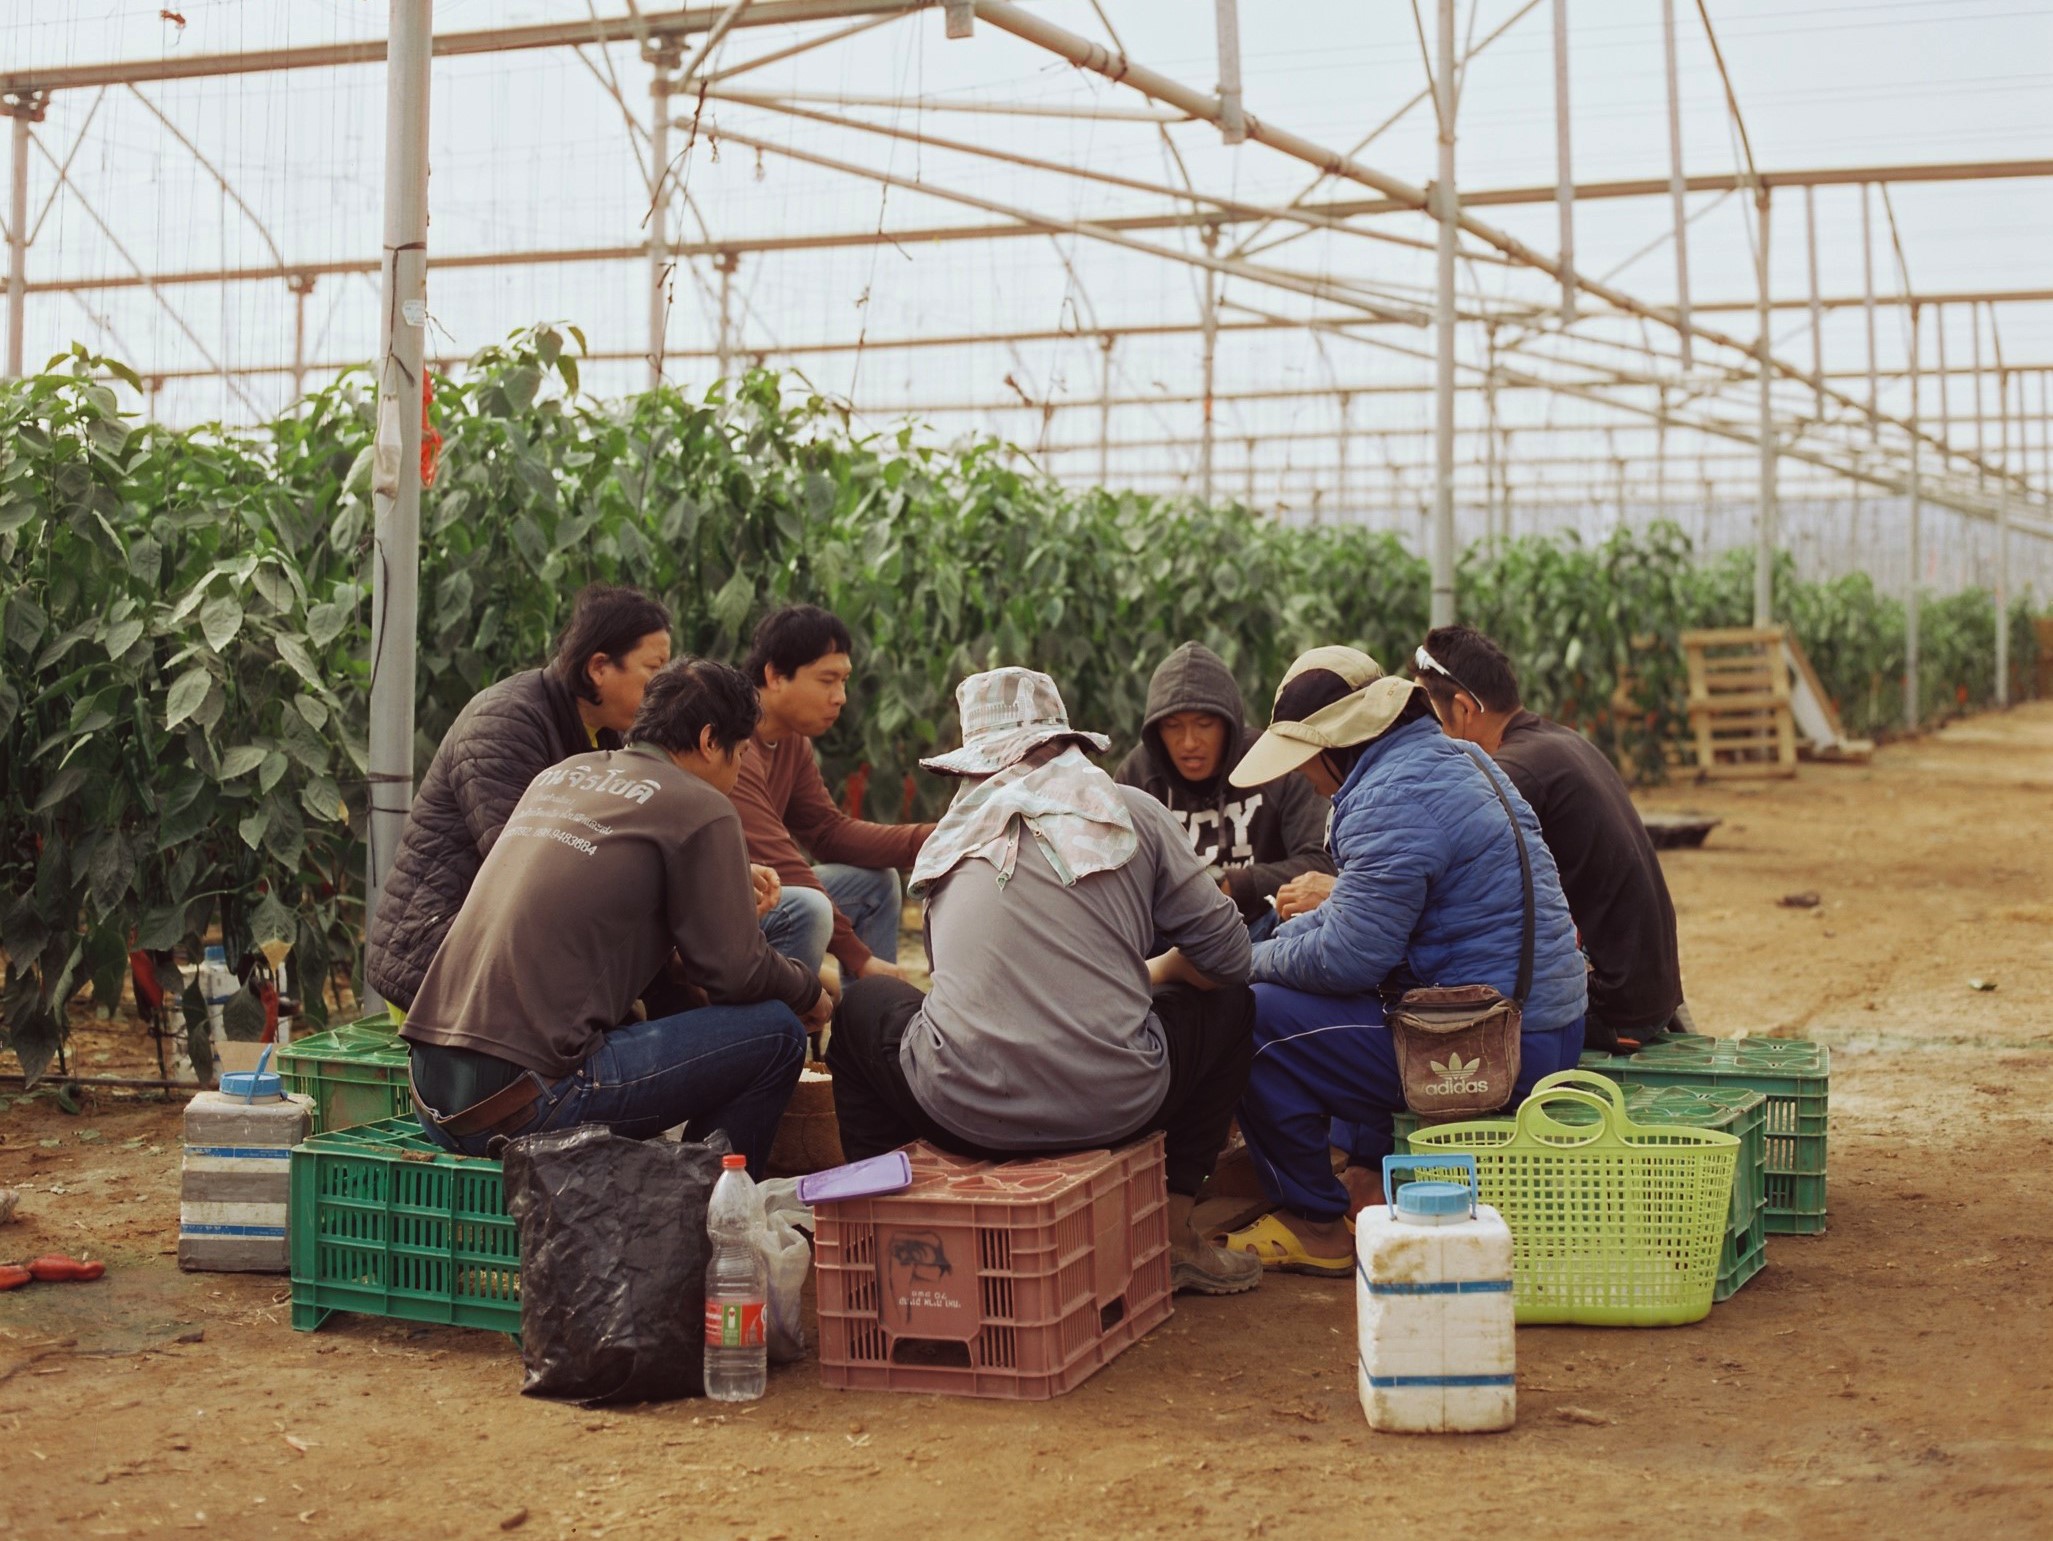 Thai workers sitting on plastic crates in a circle eating lunch next to a field